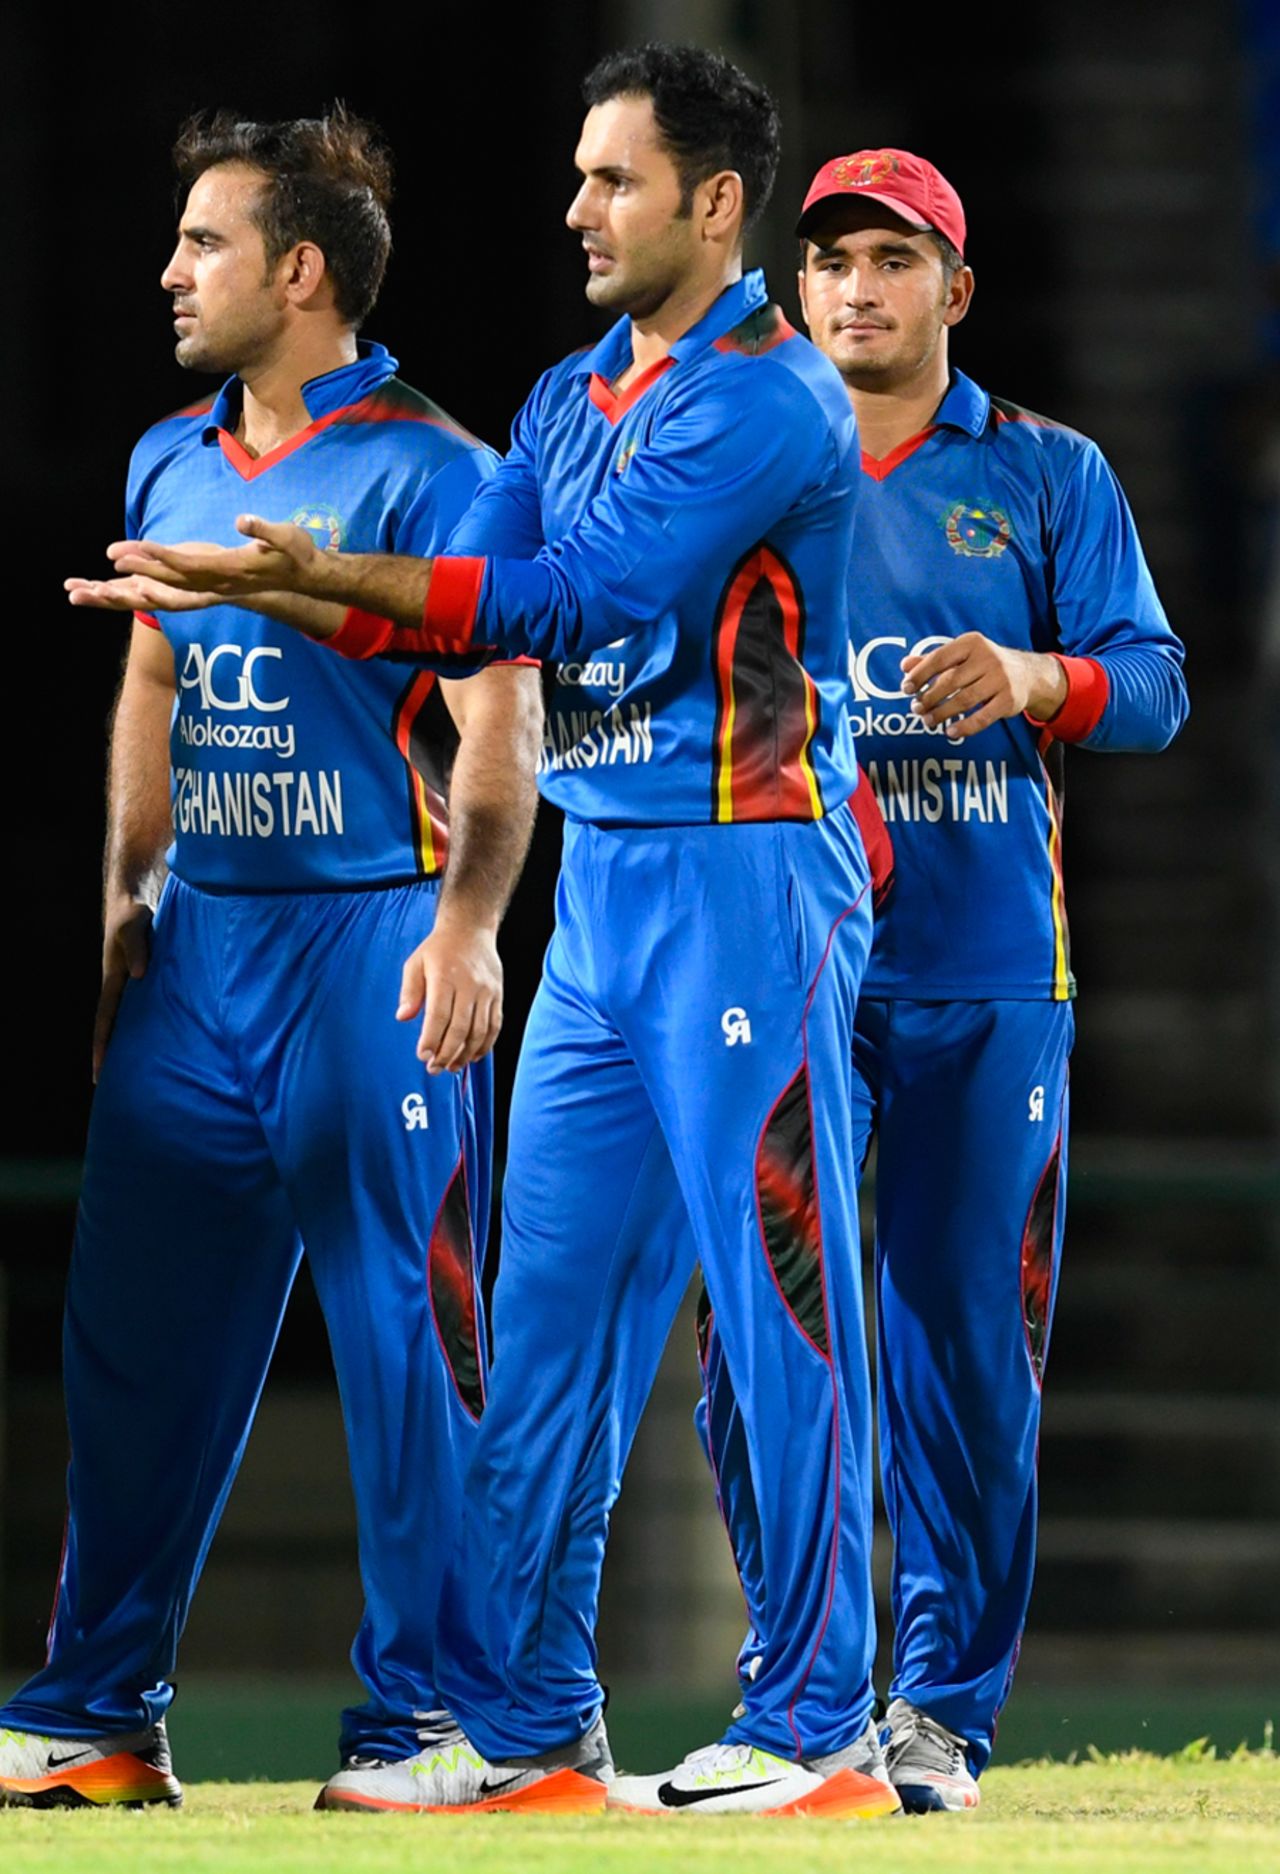 Mohammad Nabi celebrates a wicket with his team-mates, WICB President's XI v Afghanistan, warm-up T20I, St Kitts, May 30, 2017